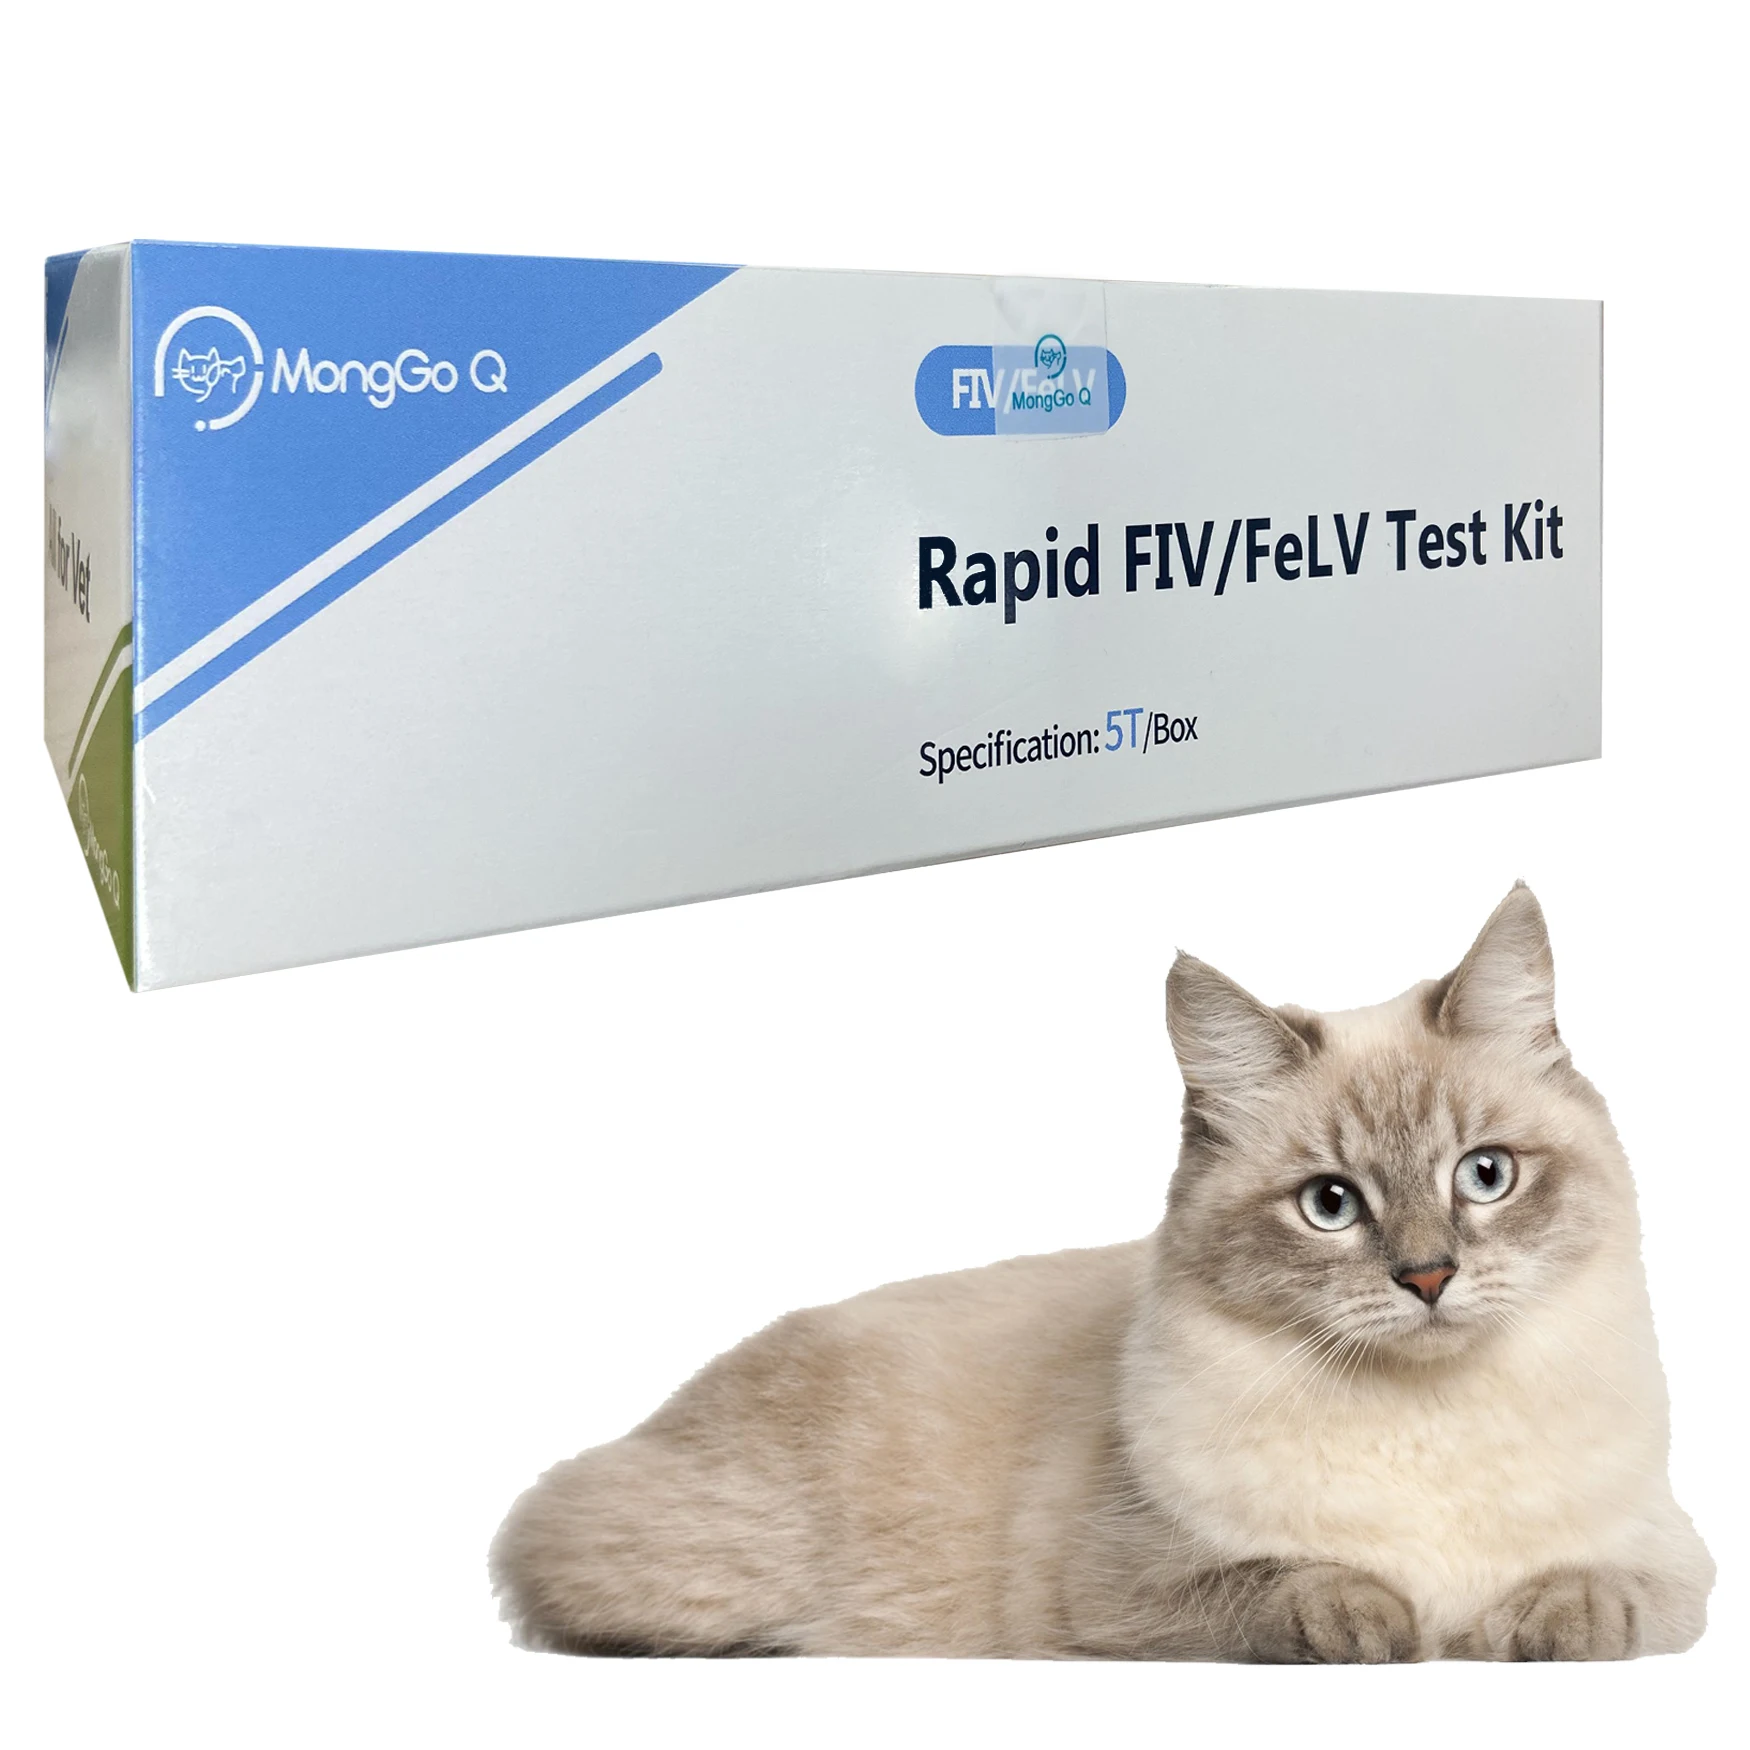 MongGo Q 5 and 10-Packed Feline Leukemia, Auxiliary Diagnostic, Healthy Rapid Testing Kit for Cats FIV, FeLV-5/10